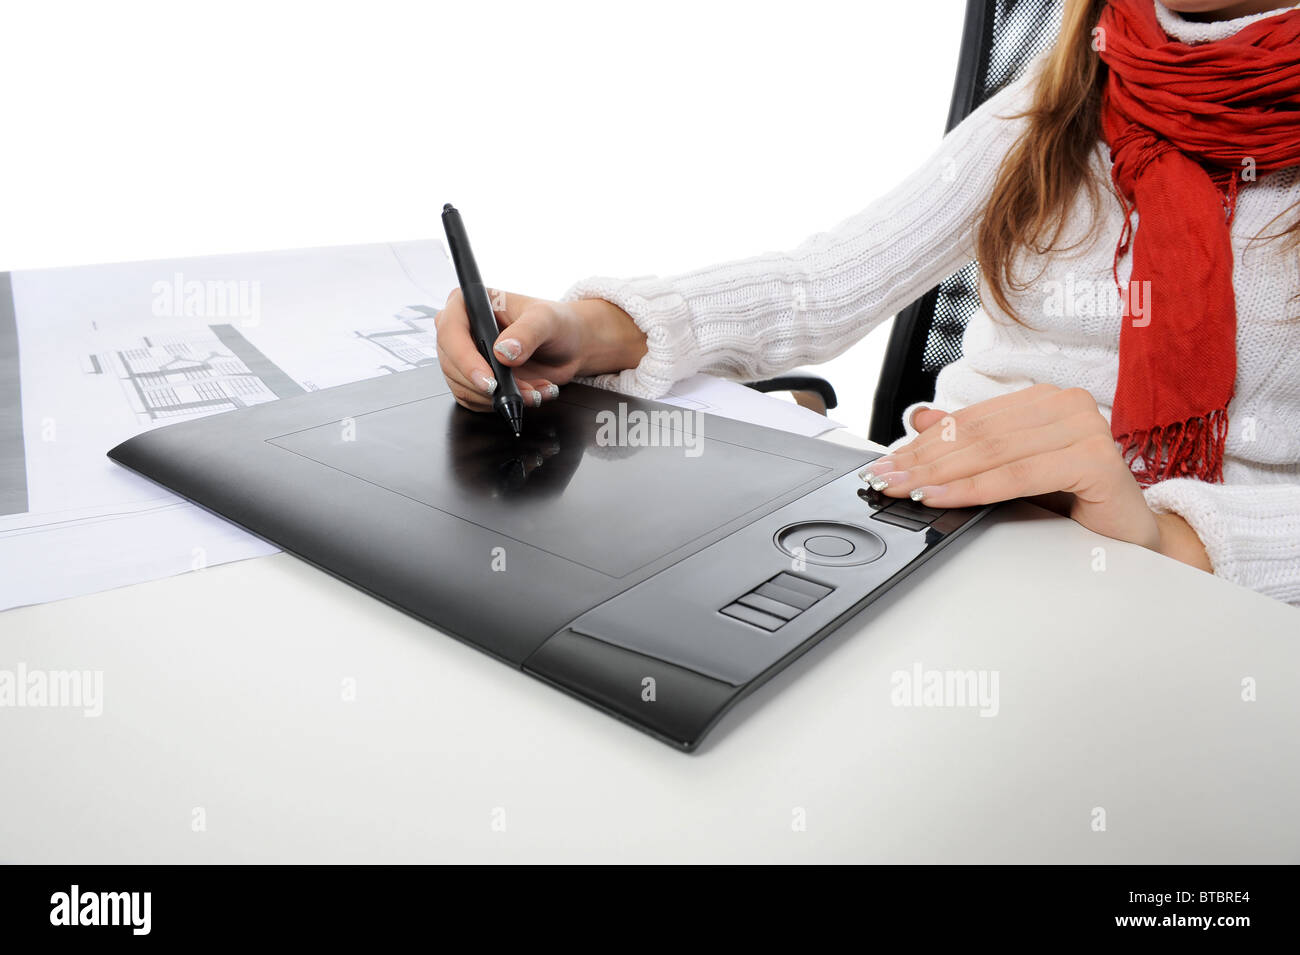 hand on graphic tablet. Stock Photo